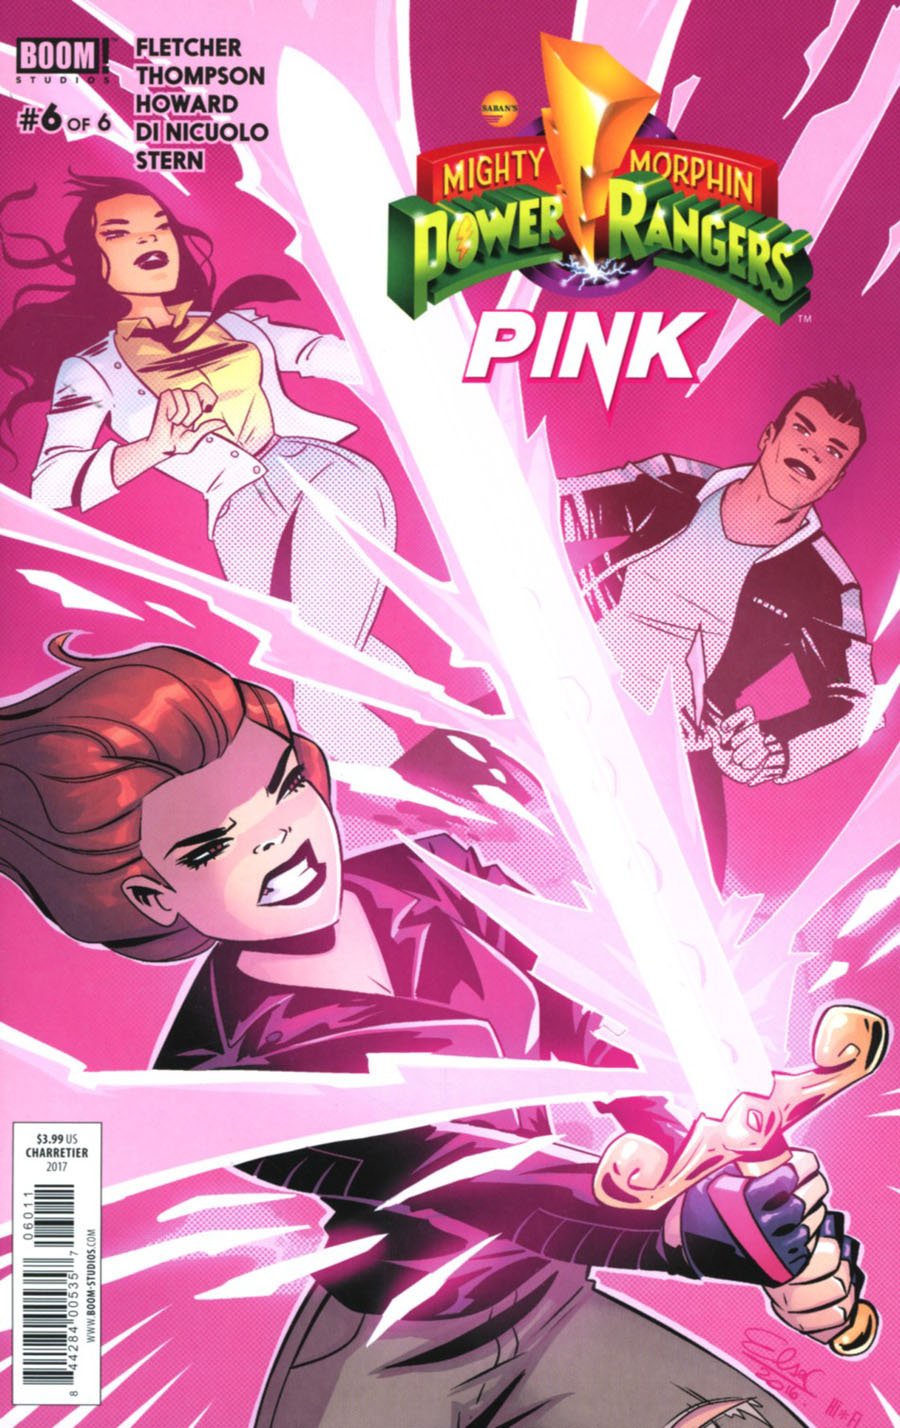 Mighty Morphin Power Rangers Pink #6 Cover A Regular Elsa Charretier Cover